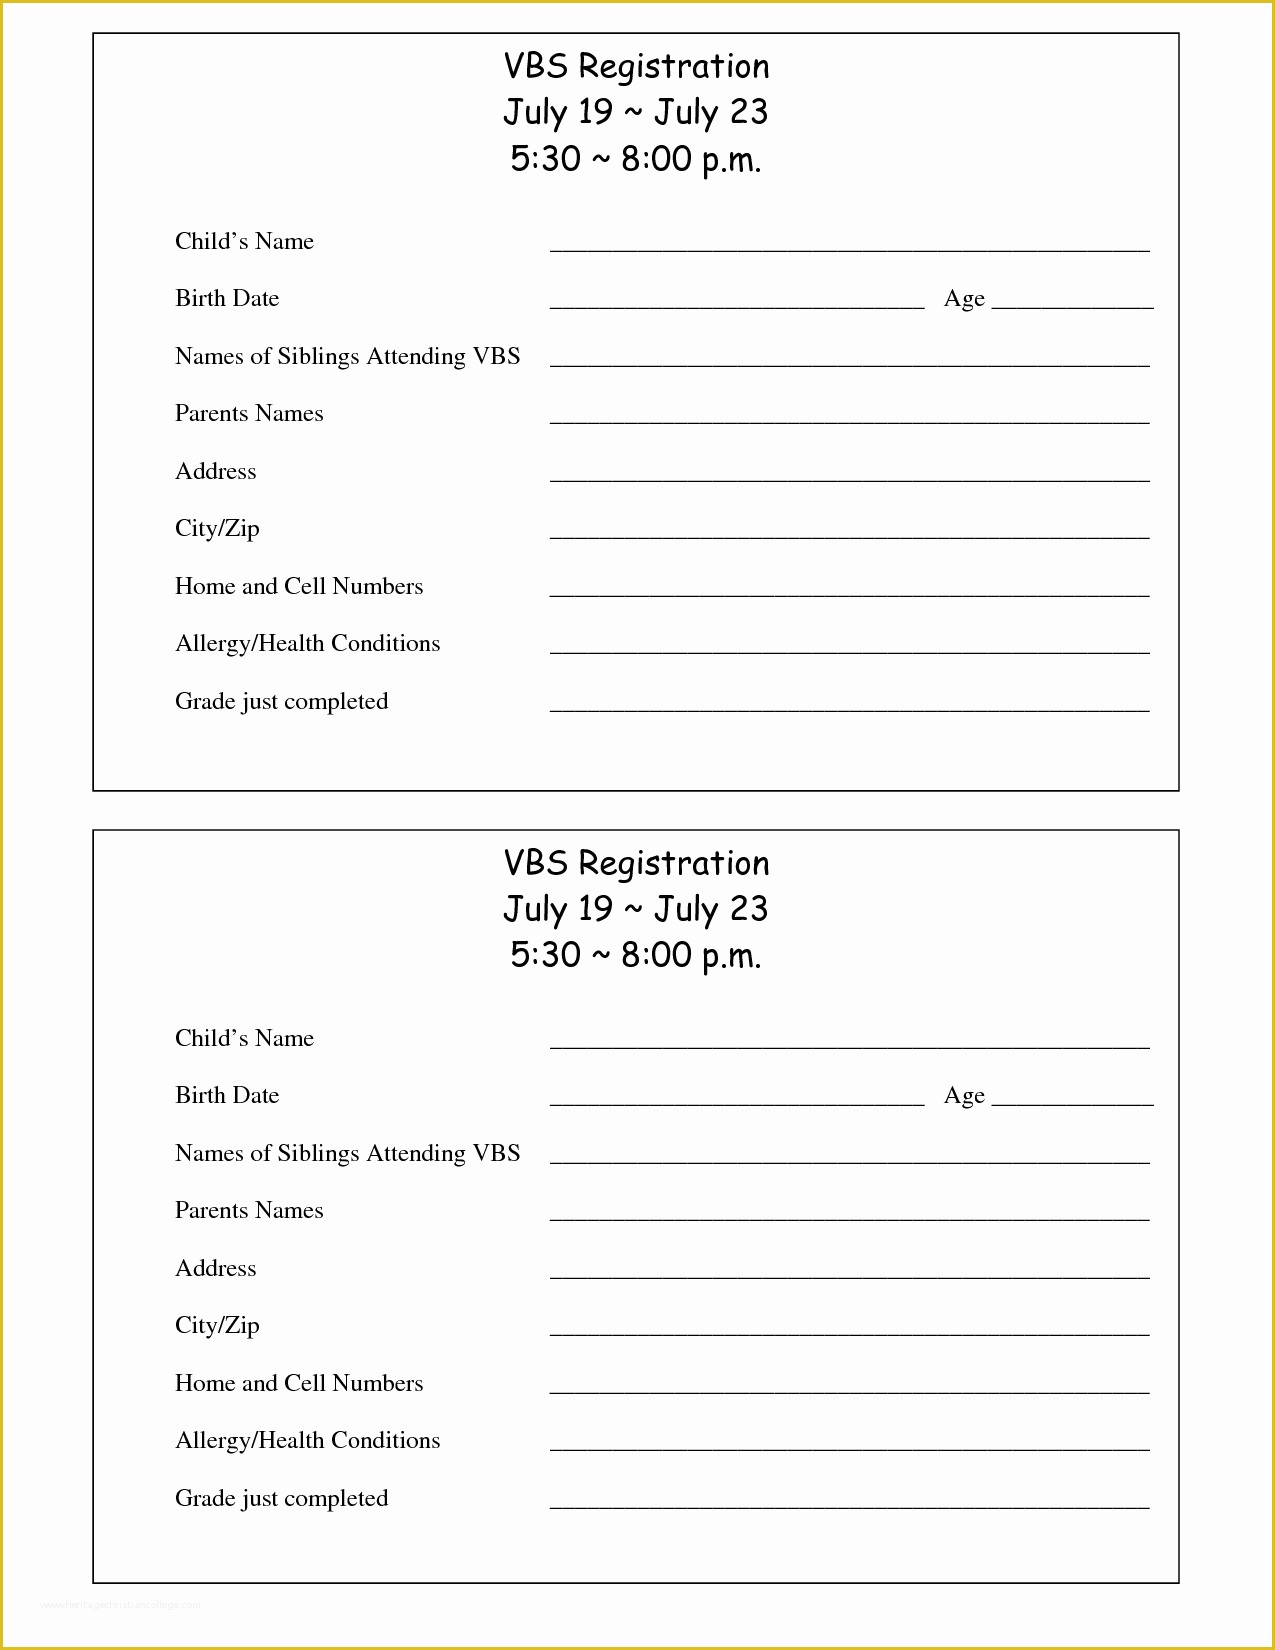 Registration form Template Free Download Of Printable Vbs Registration form Template